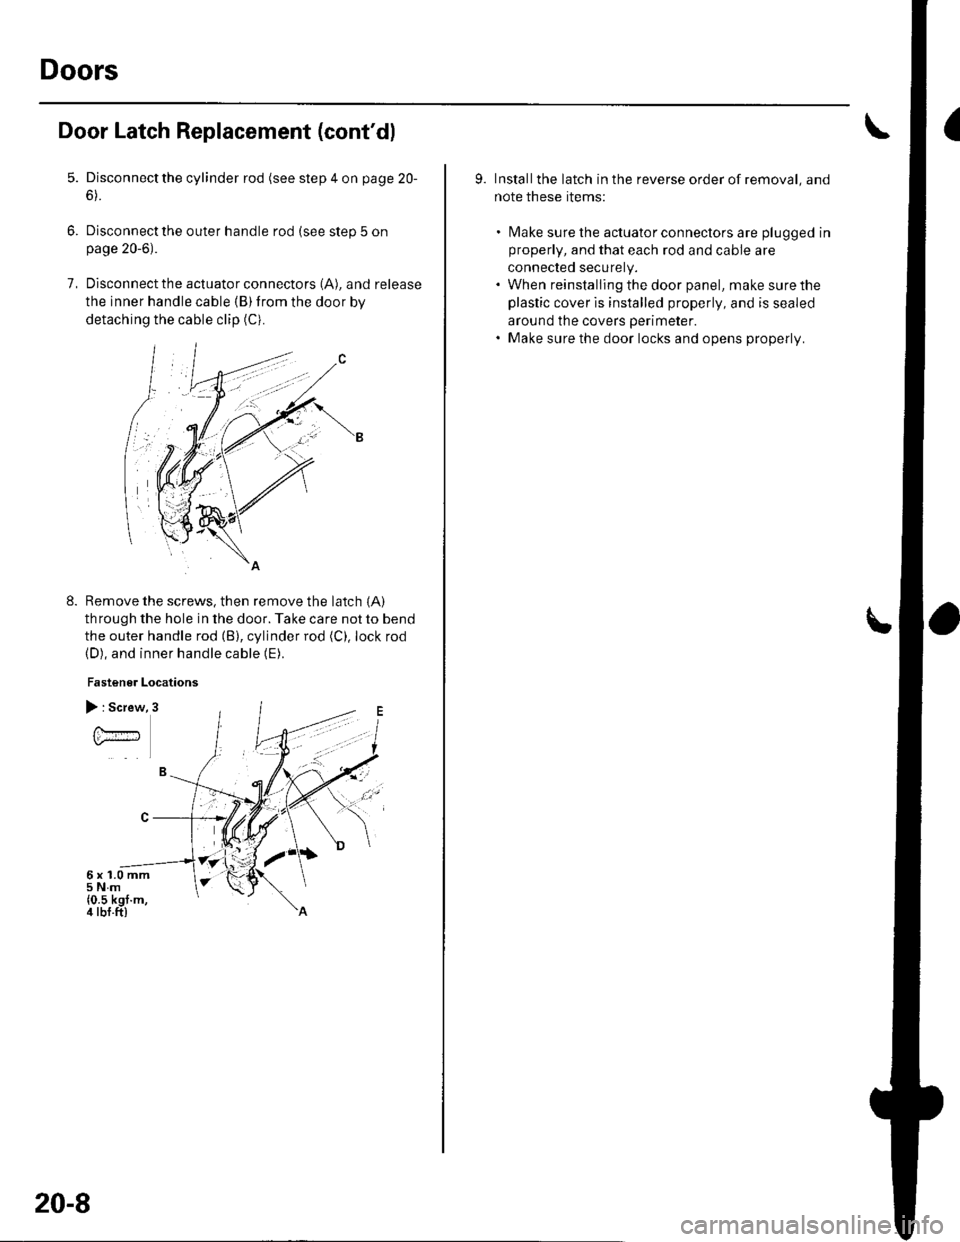 HONDA CIVIC 2003 7.G Workshop Manual Doors
Door Latch Replacement (contdl
5.
6.
7.
Disconnect the cylinder rod (see step 4 on page 20-
6).
Disconnect the outer handle rod (see step 5 onpage 20-6).
Disconnect the actuator connectors (A),